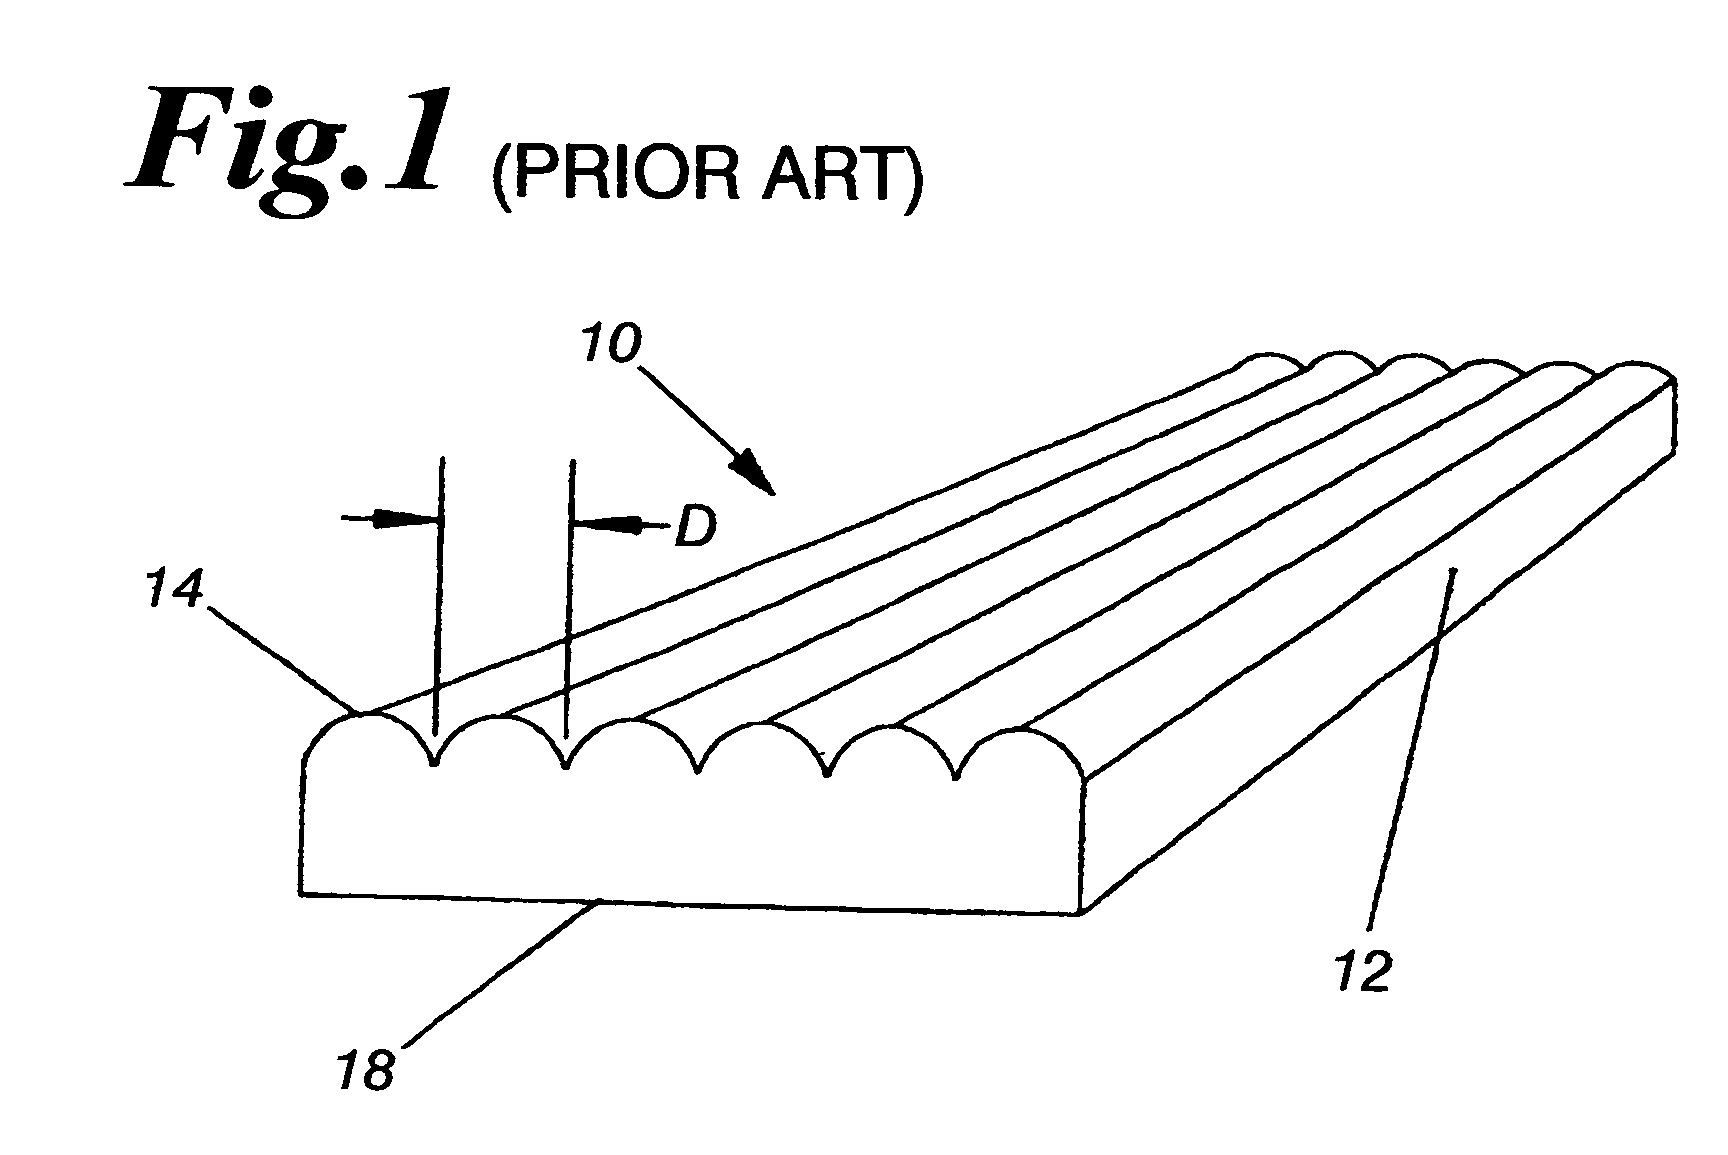 Method of producing a sheet having lenticular lens in pre-selected areas